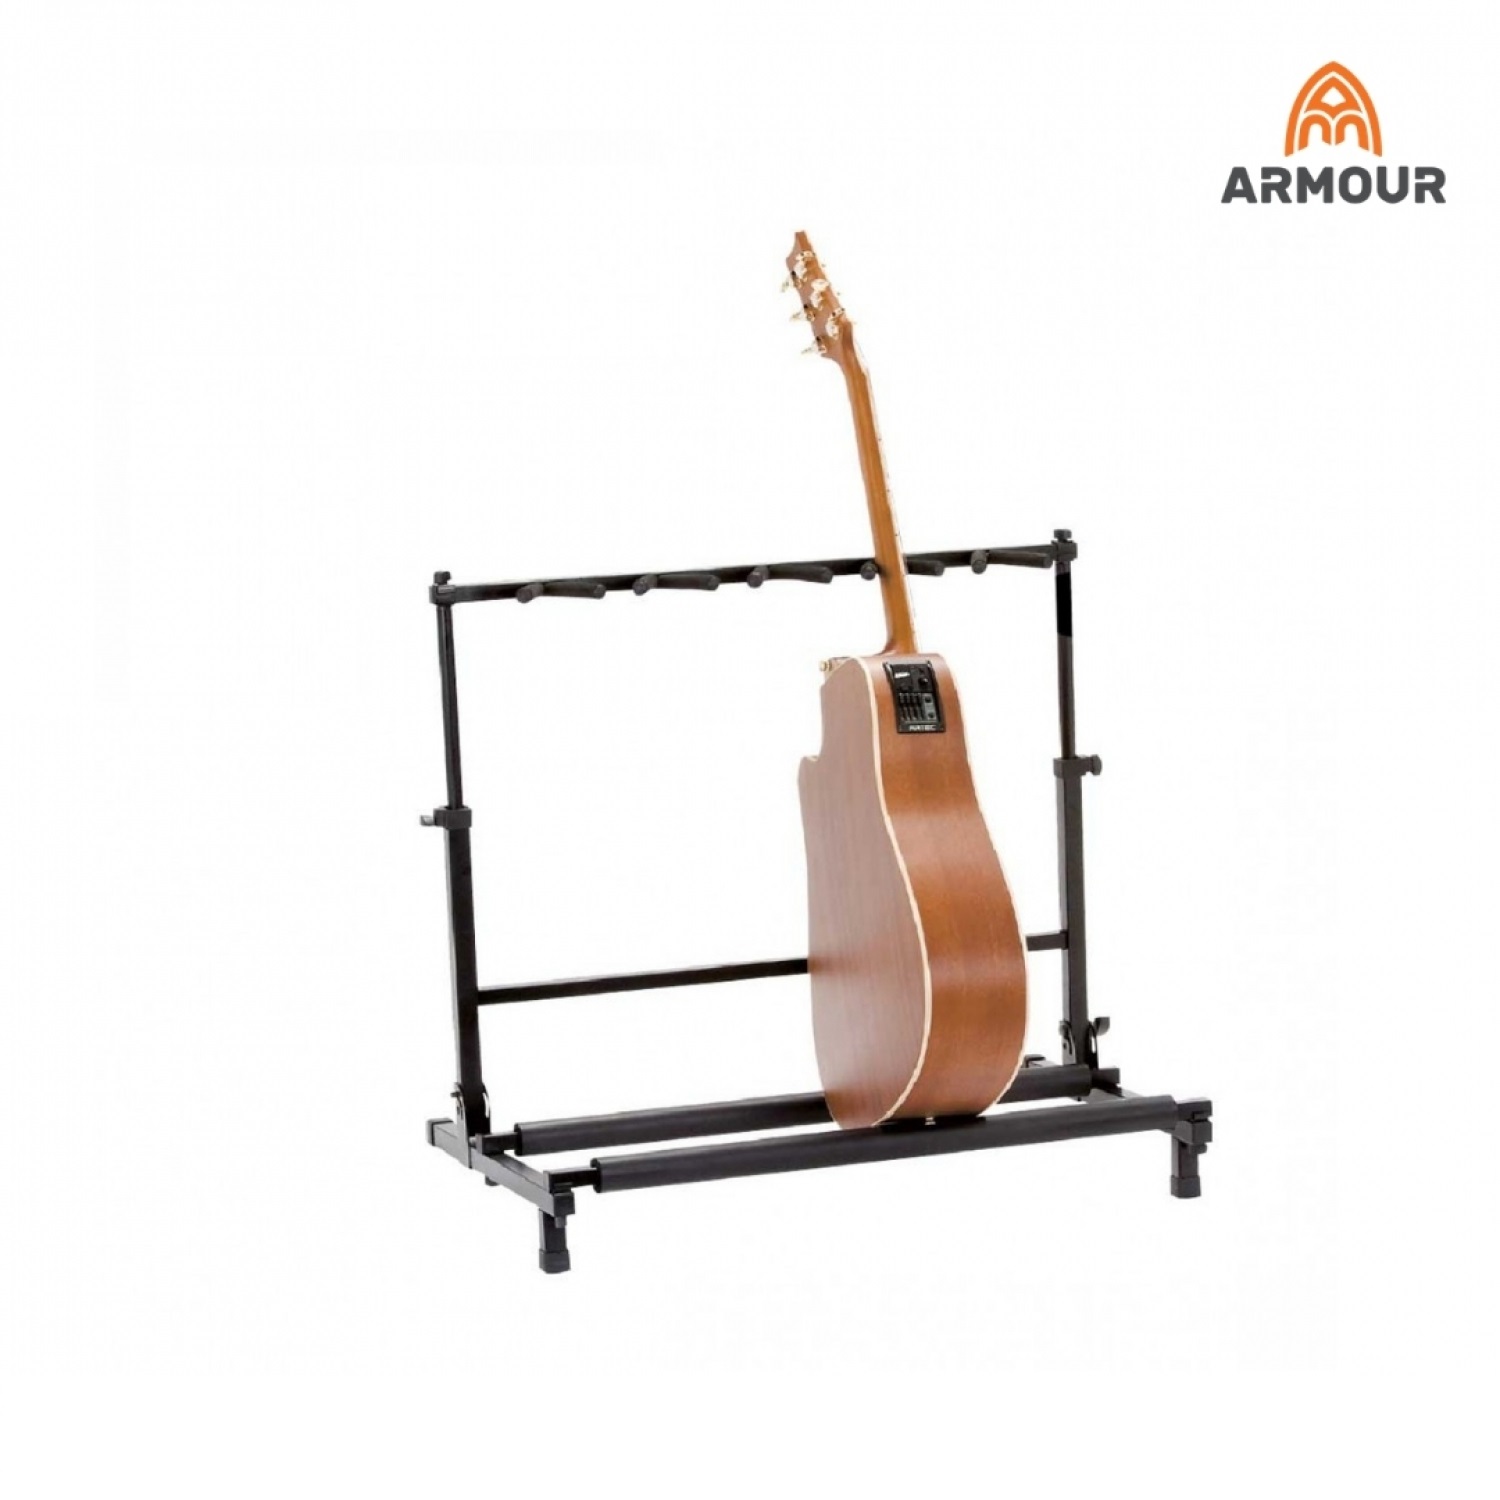 Armour GS55 Guitar Rack for 5 Guitars Online price in India